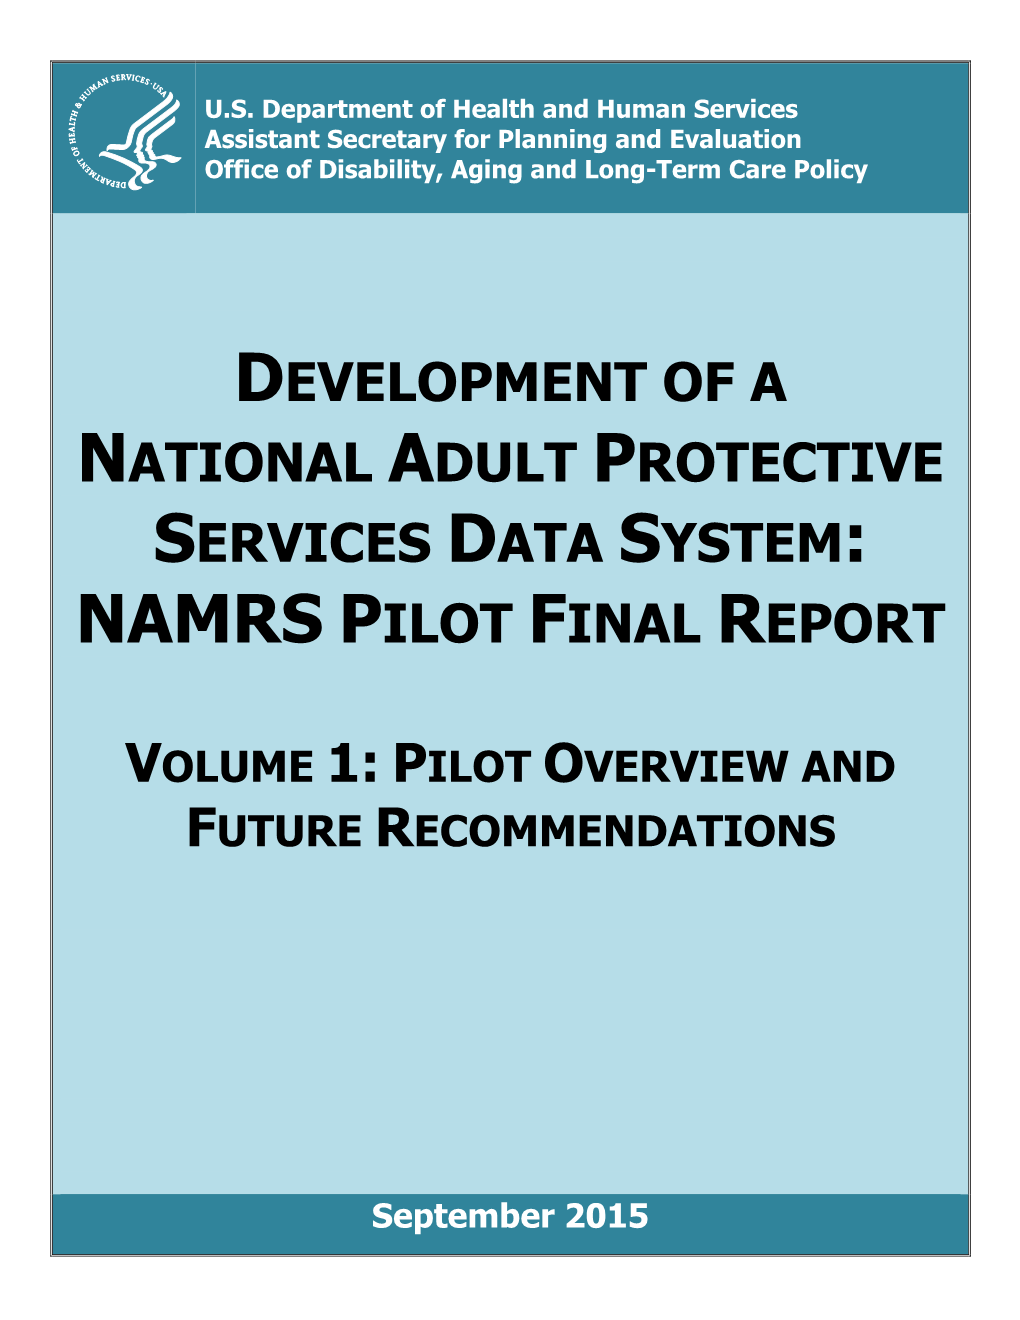 Development of a National Adult Protective Services Data System: Namrs Pilot Final Report